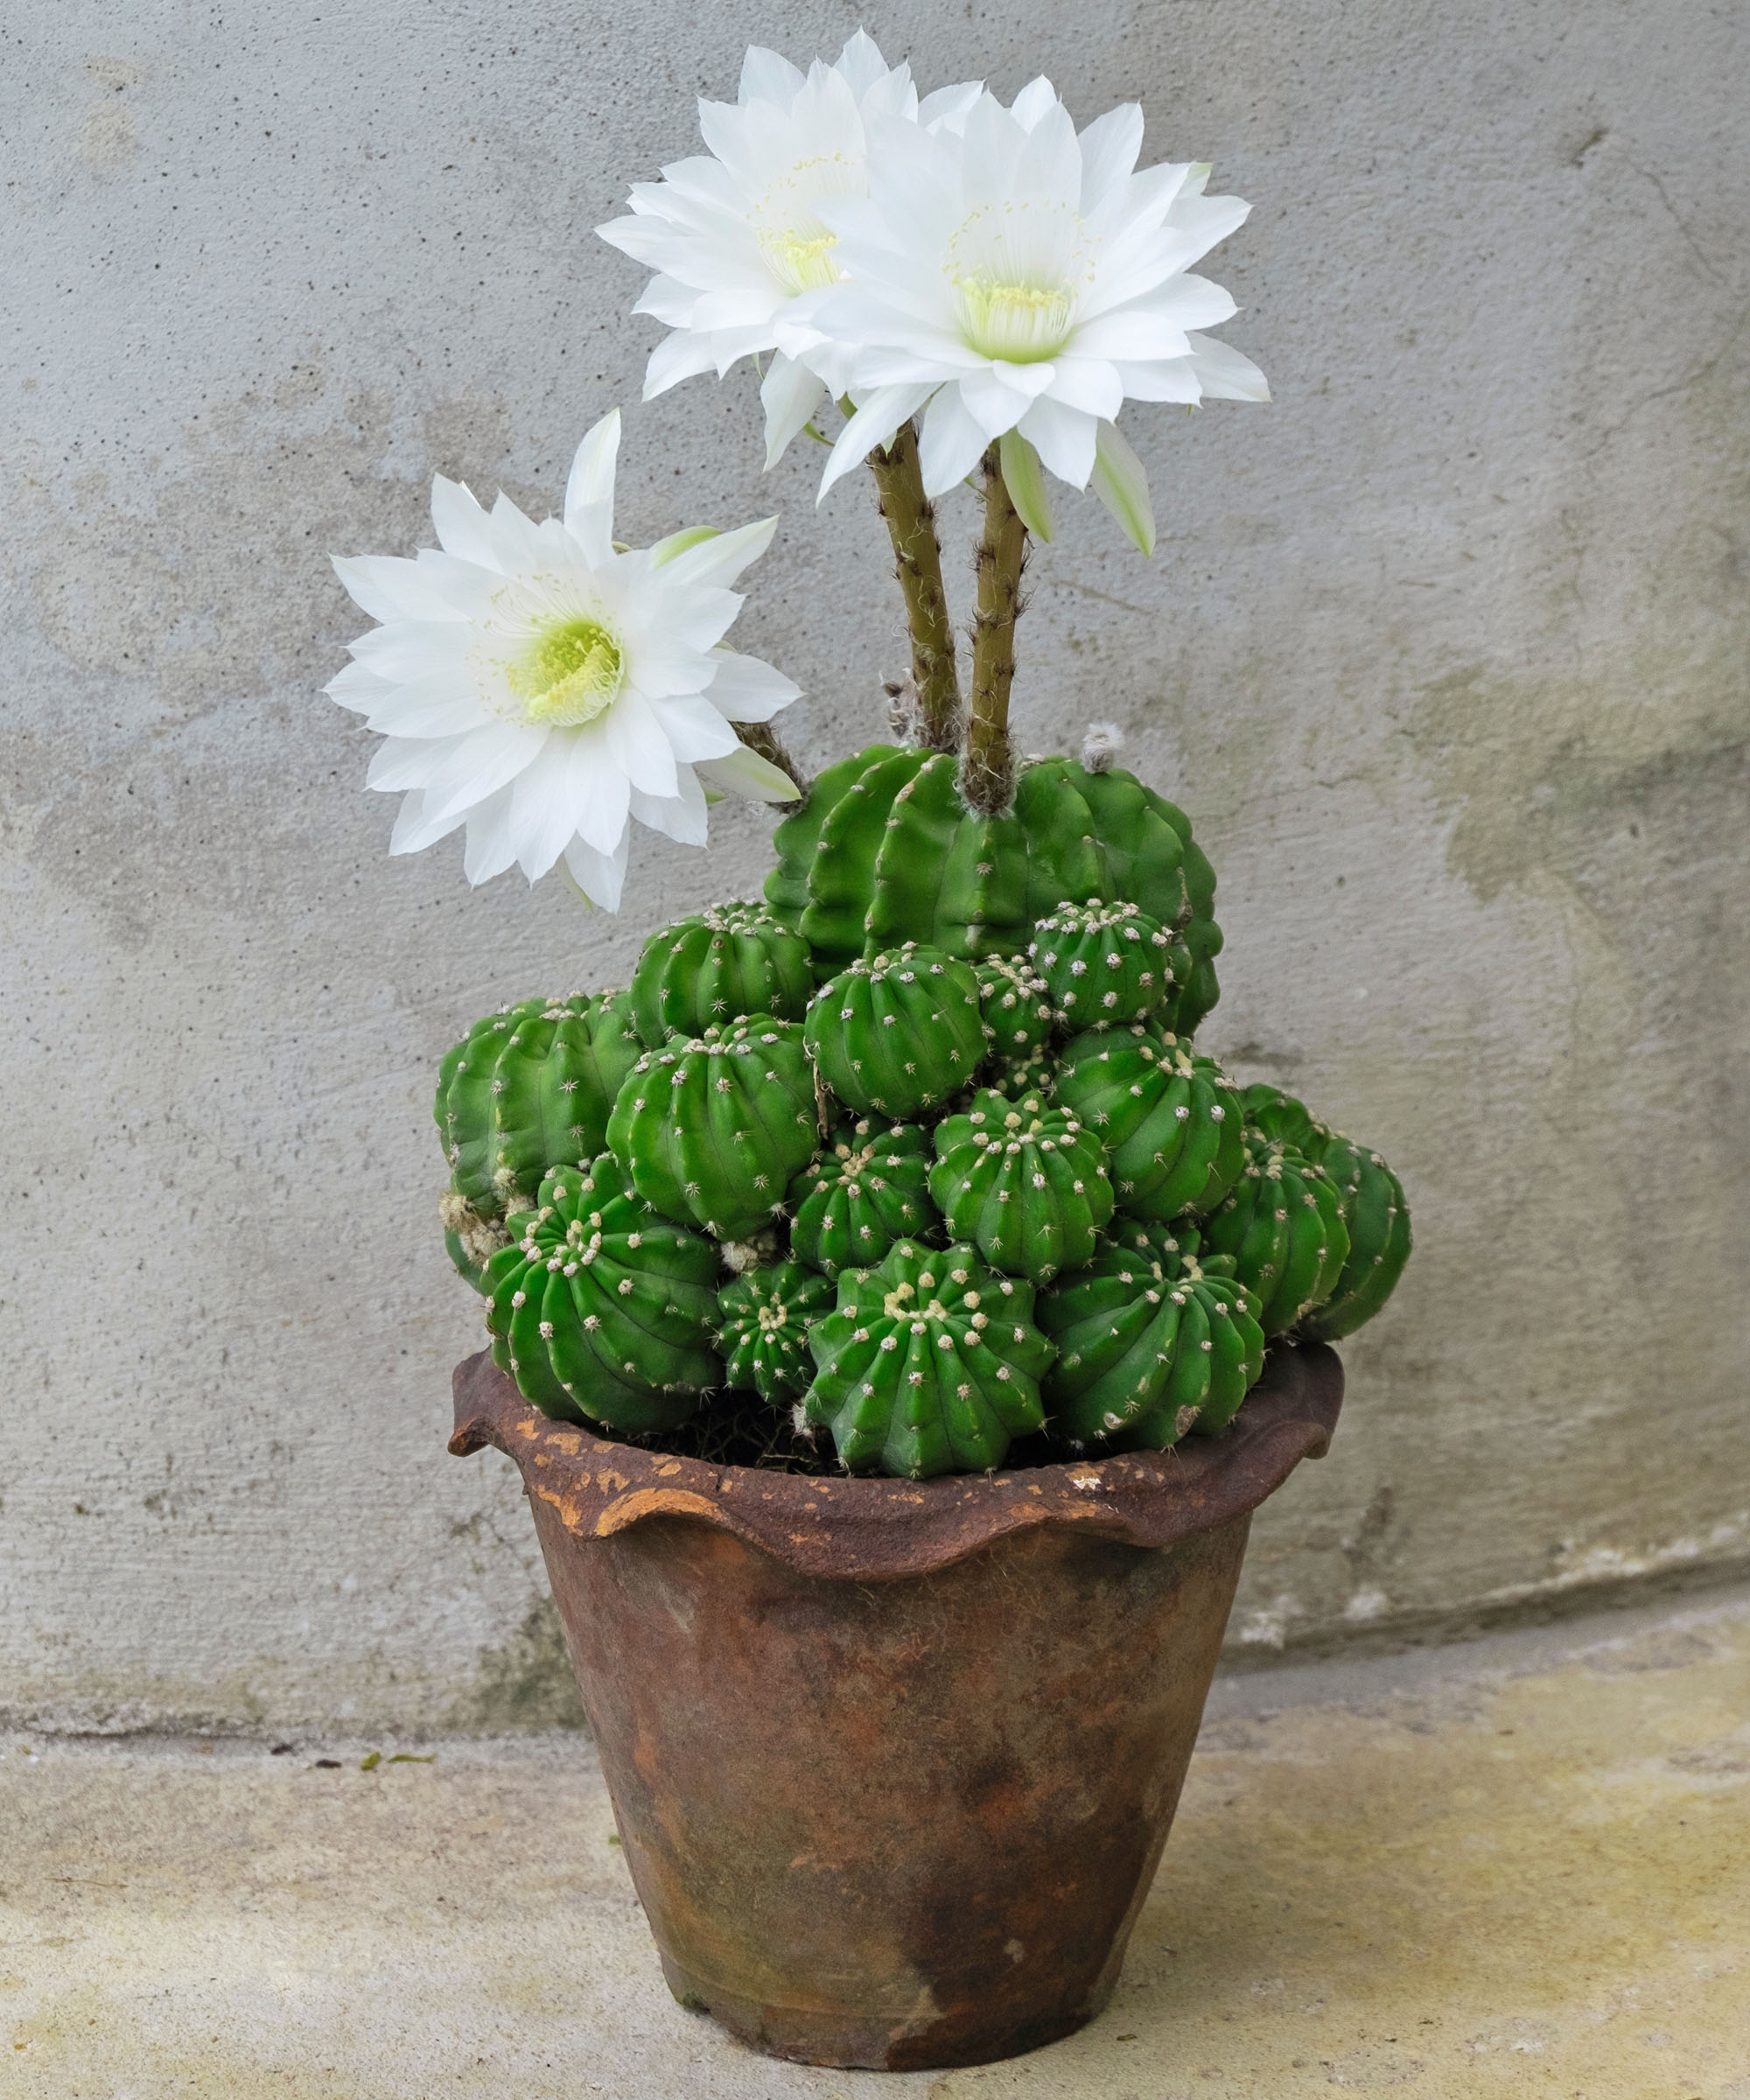 Easter lily cactus Echinopsis with white flowers